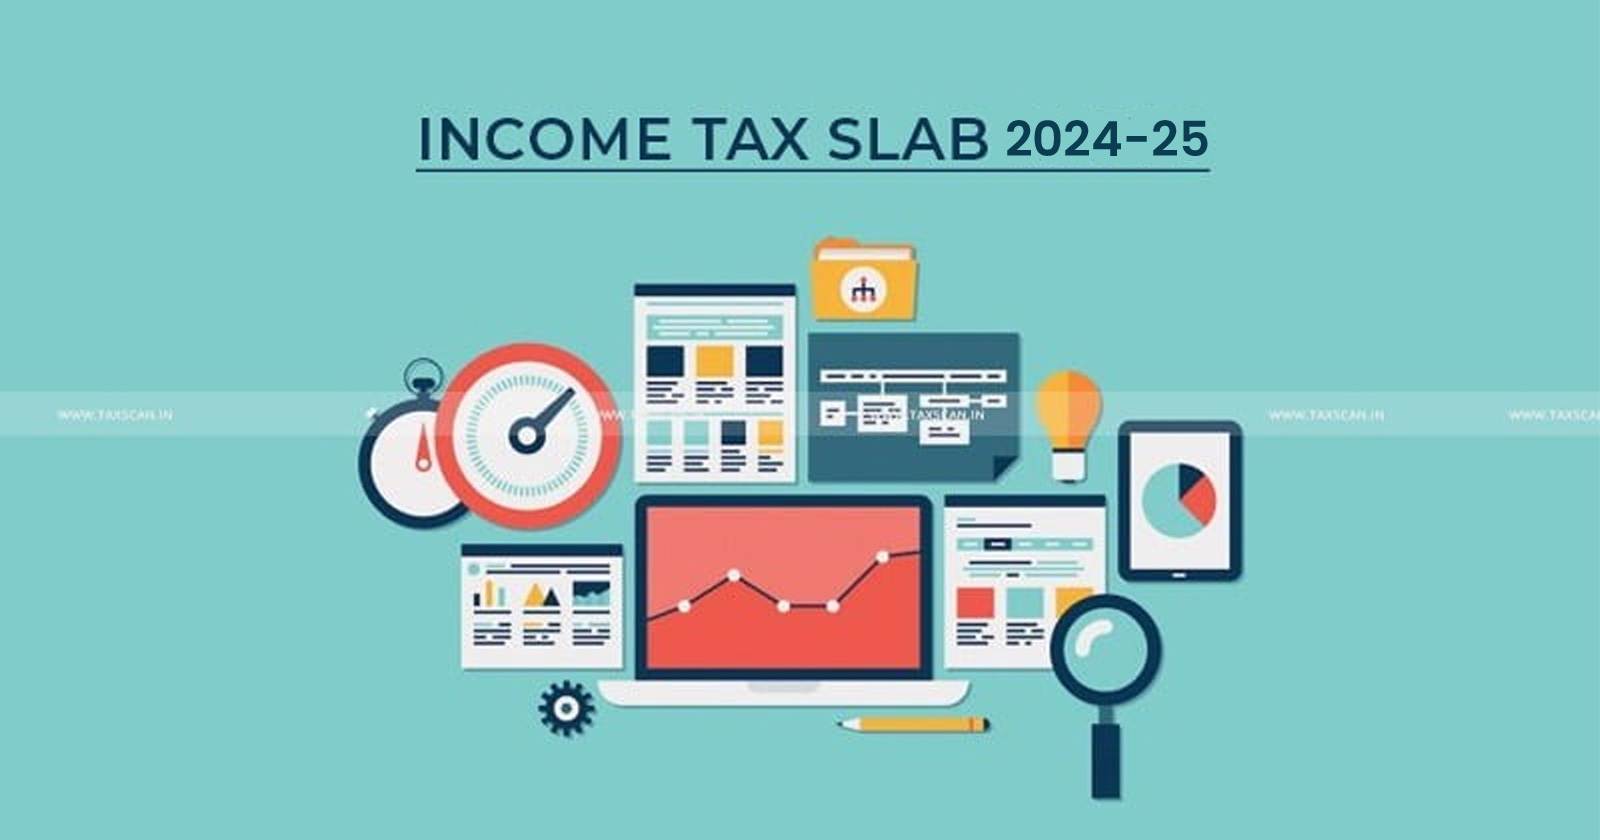 Income Tax Slabs 2024-25 - Budget 2024 prioritized - betterment - economically weaker sections - TAXSCAN